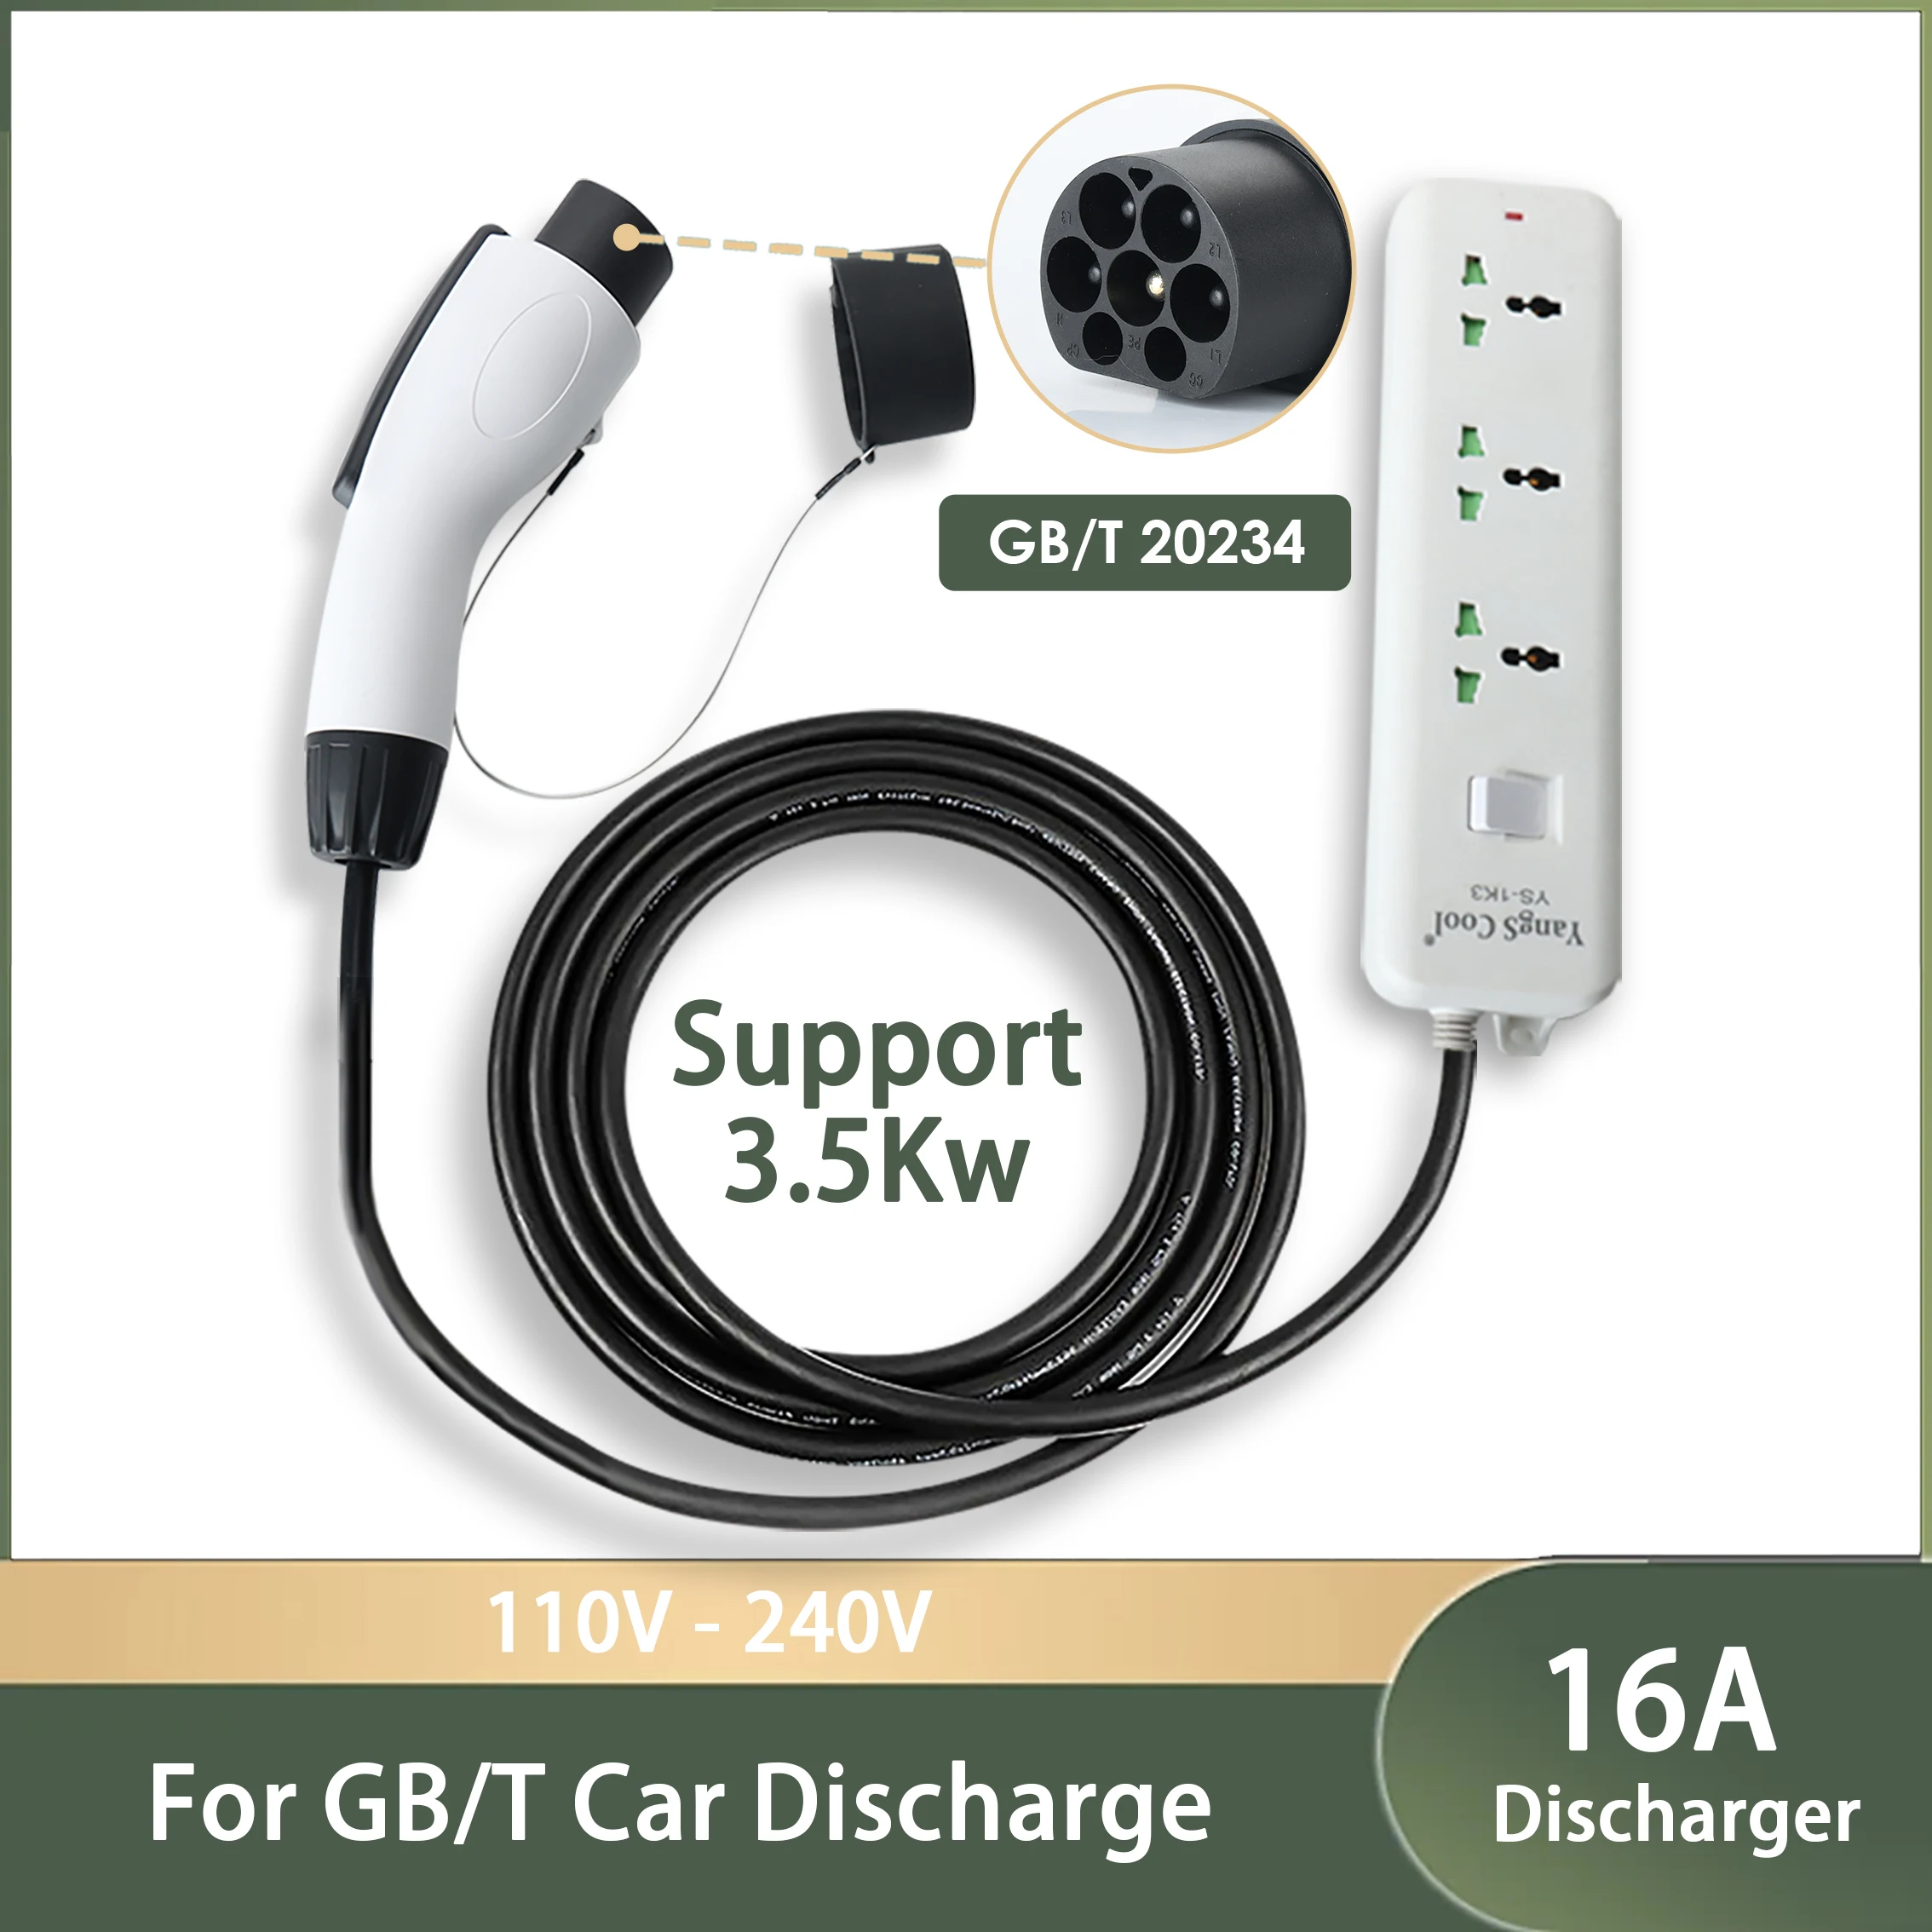 

BYD MG4 Hyundai Electric Car Discharge V2L GBT To US Plug Three Hole Socket For Outdoor Camping Convert EV To AC Outlet Charger